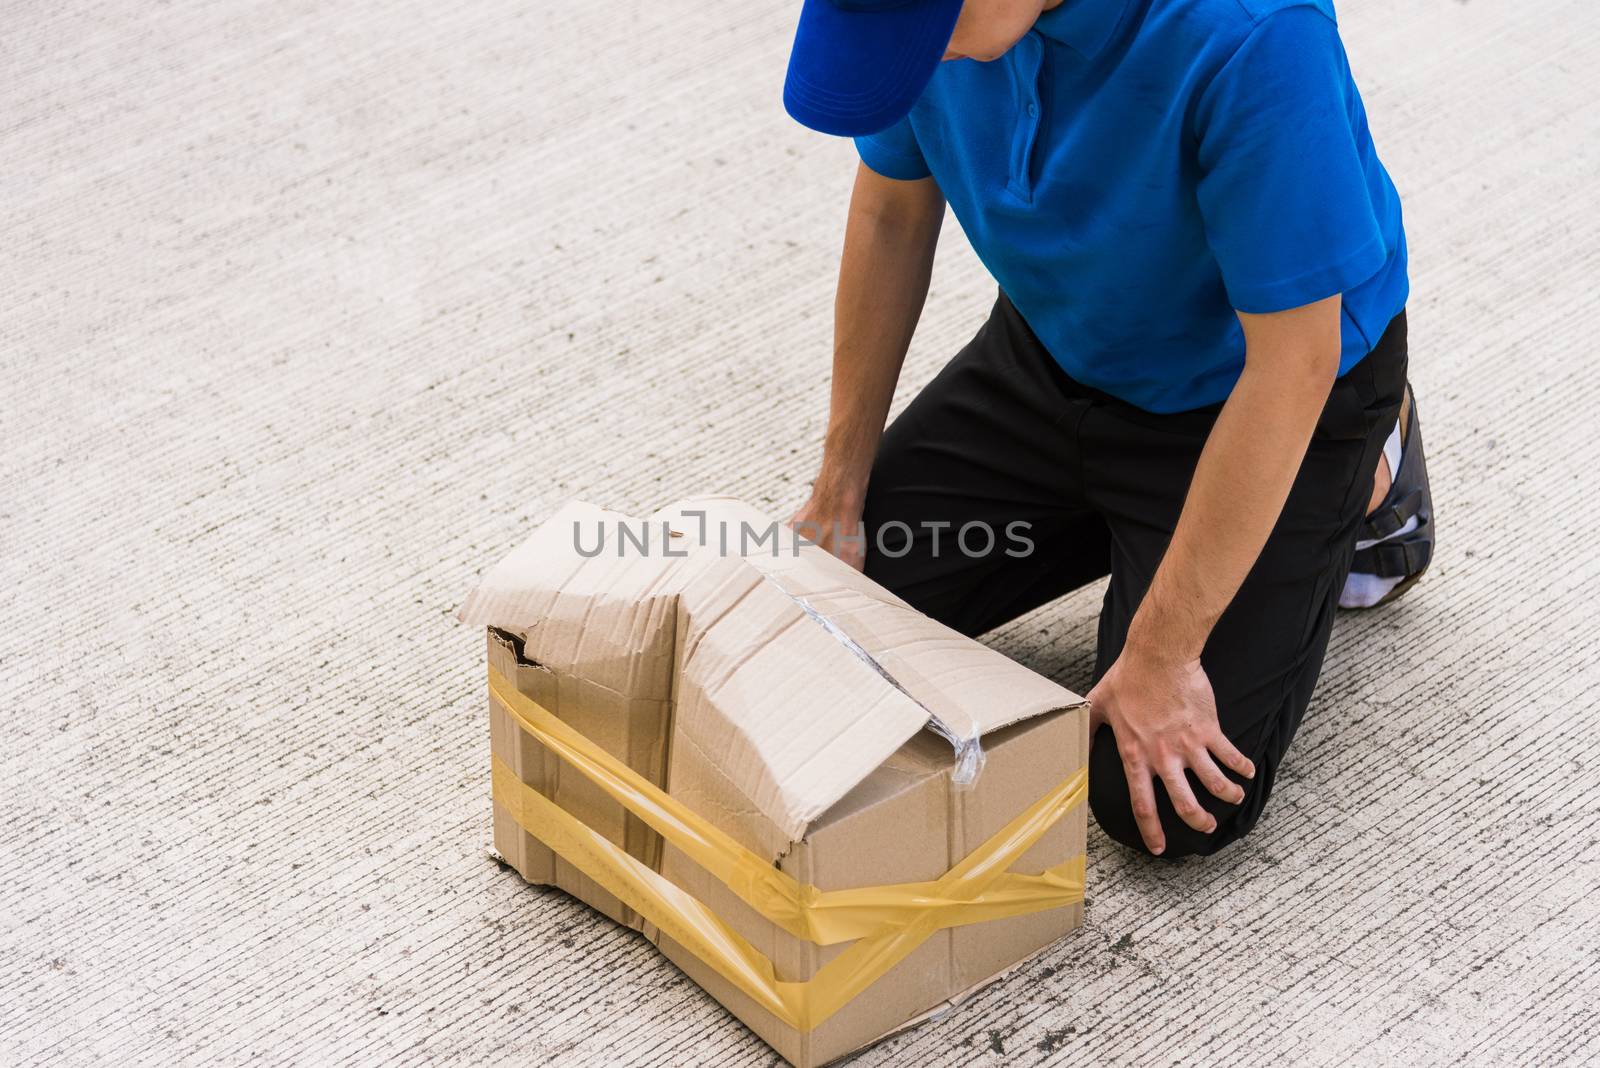 Asian young delivery man in blue uniform he emotional falling courier hold damaged cardboard box is broken at door front home, Accident bad transport shipment or poor quality delivery service concept